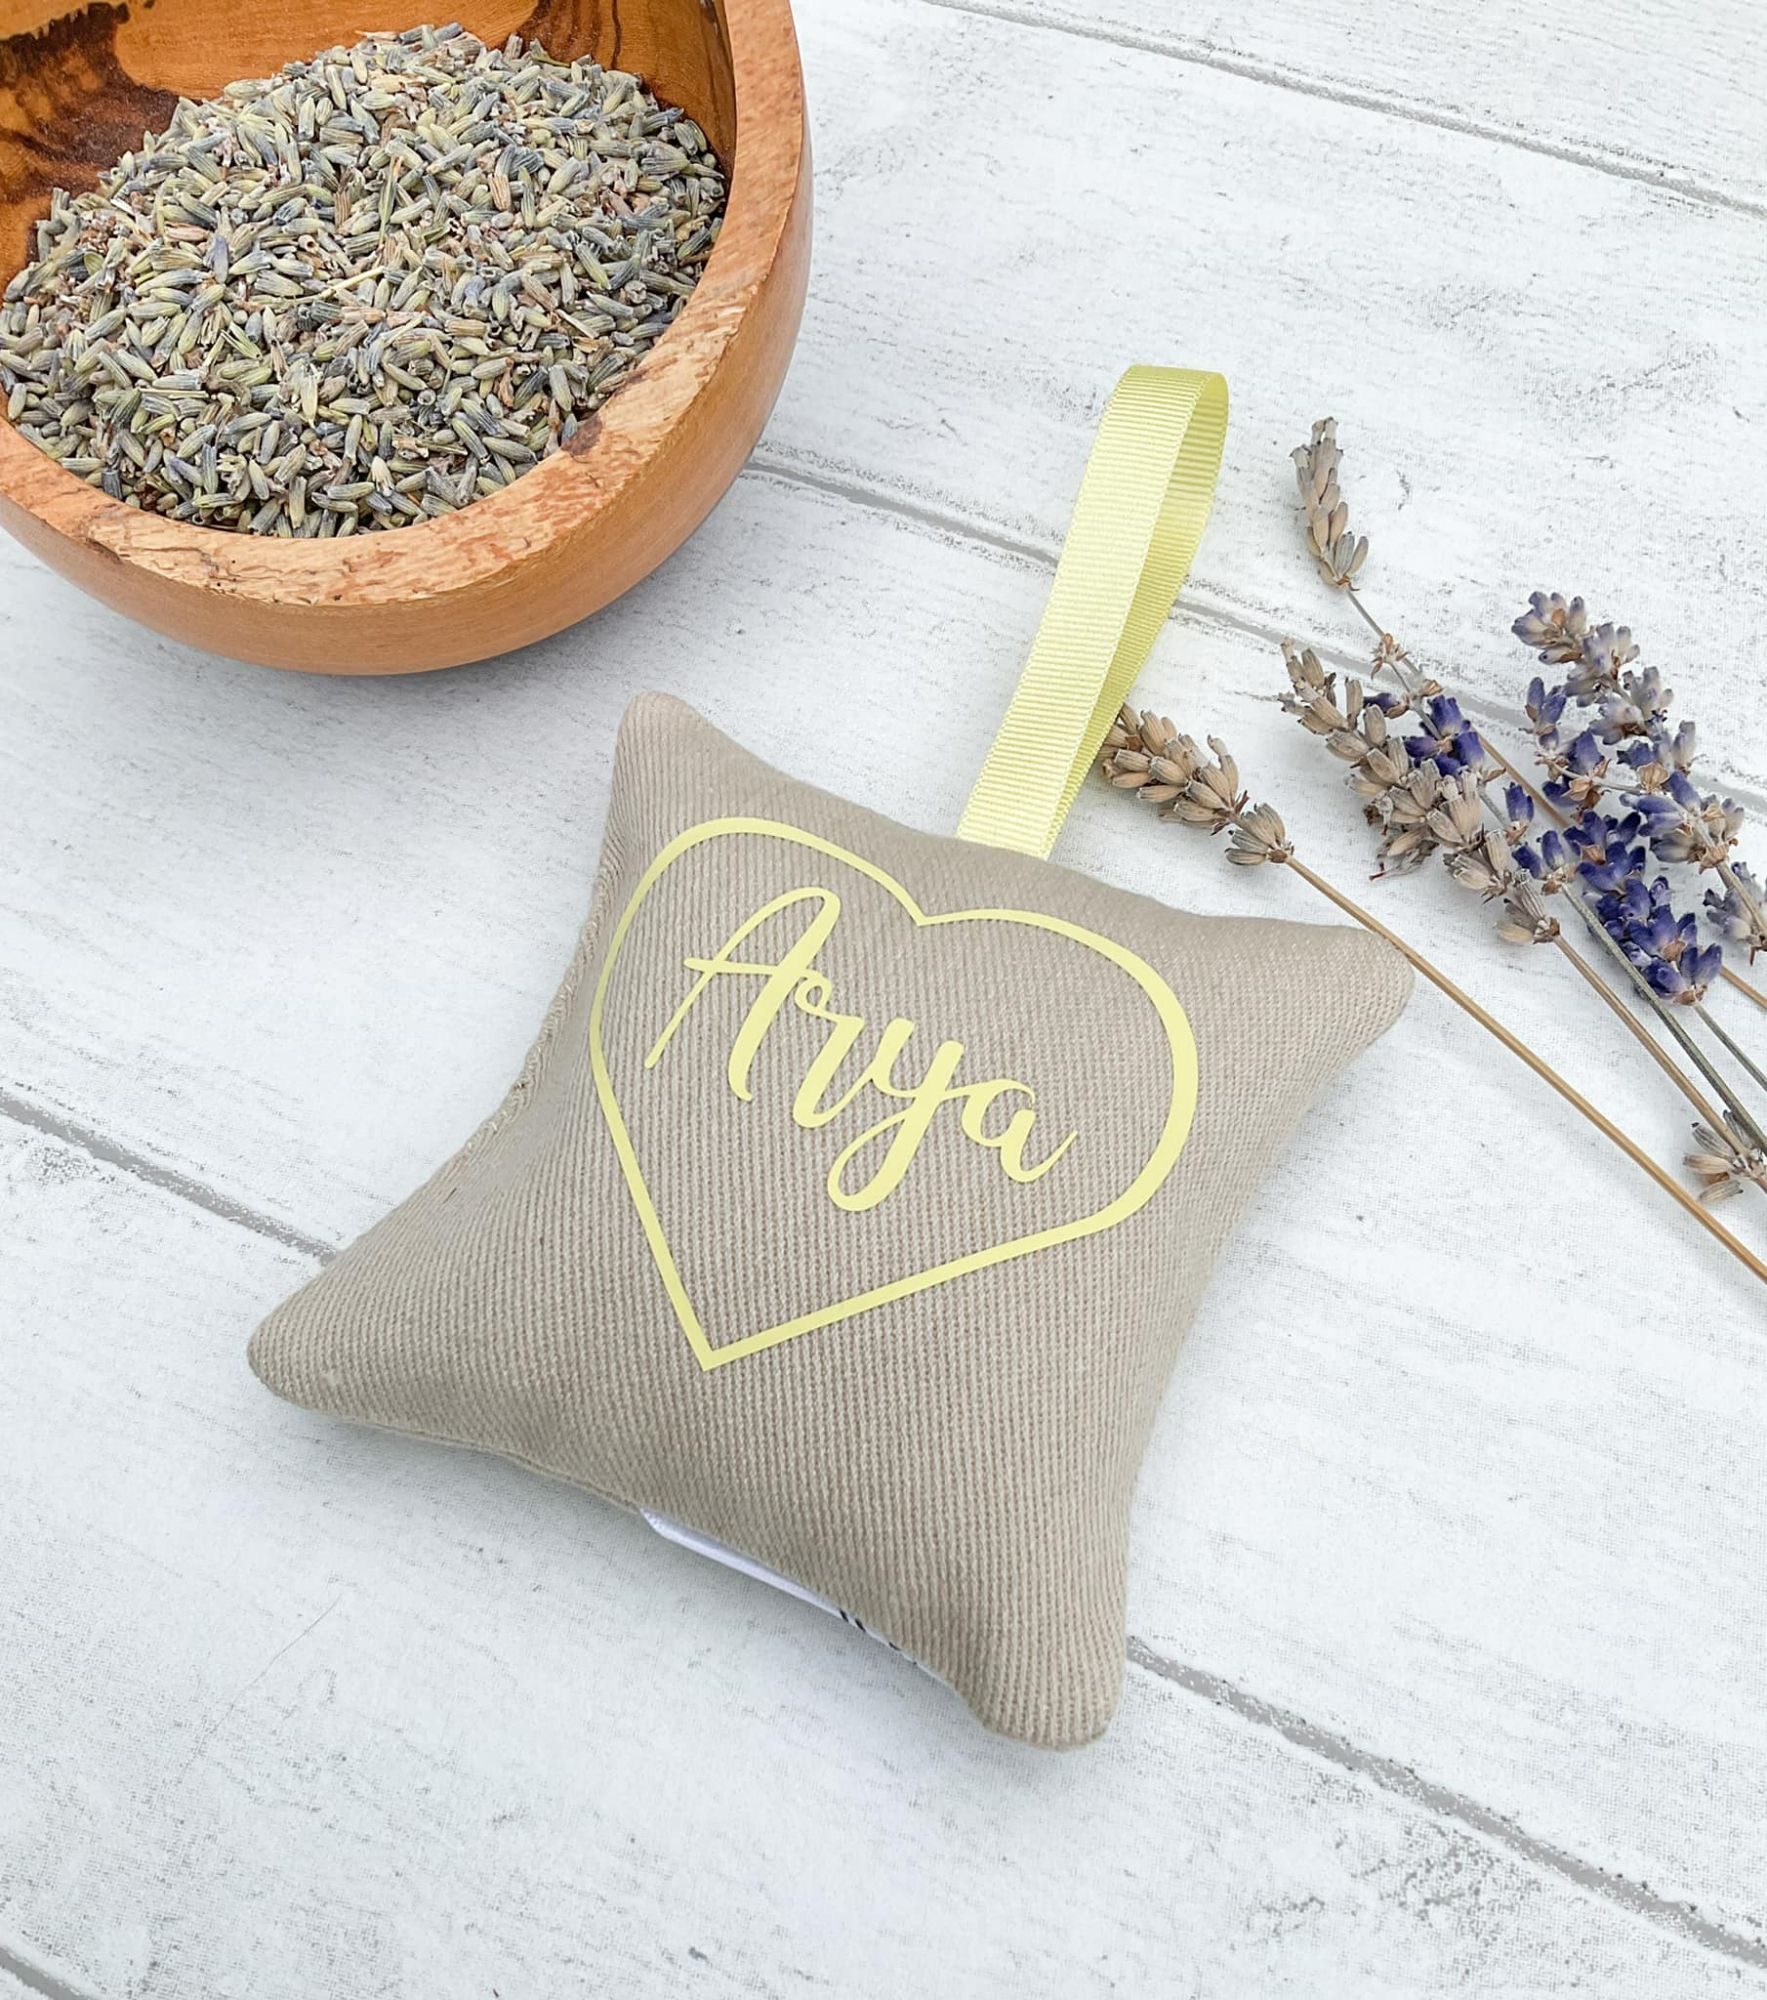 Lavender bag sachet with 'Arya' written on in yellow